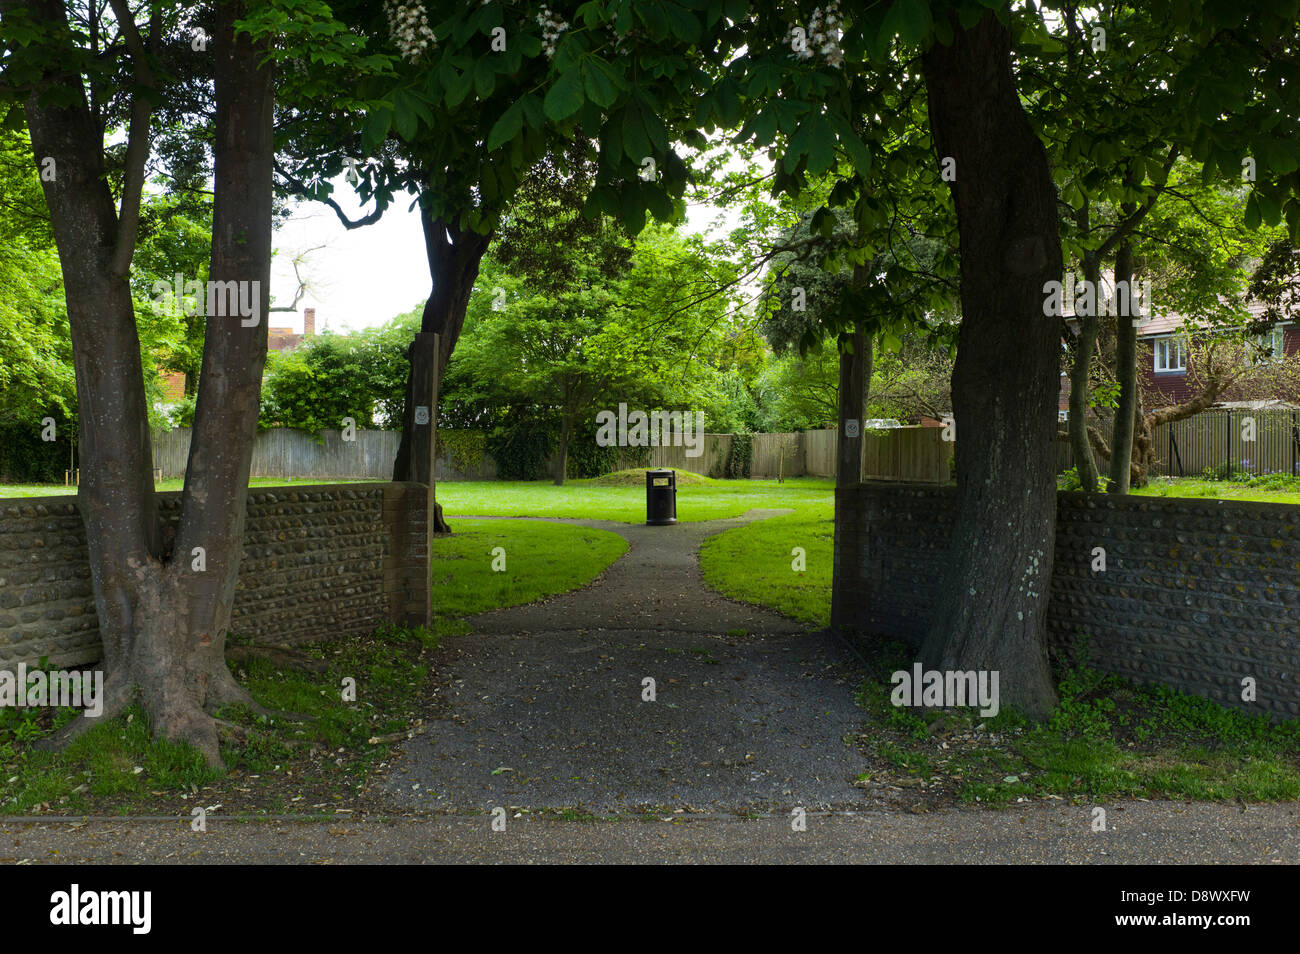 Entrance to small park, Portslade, Sussex Stock Photo